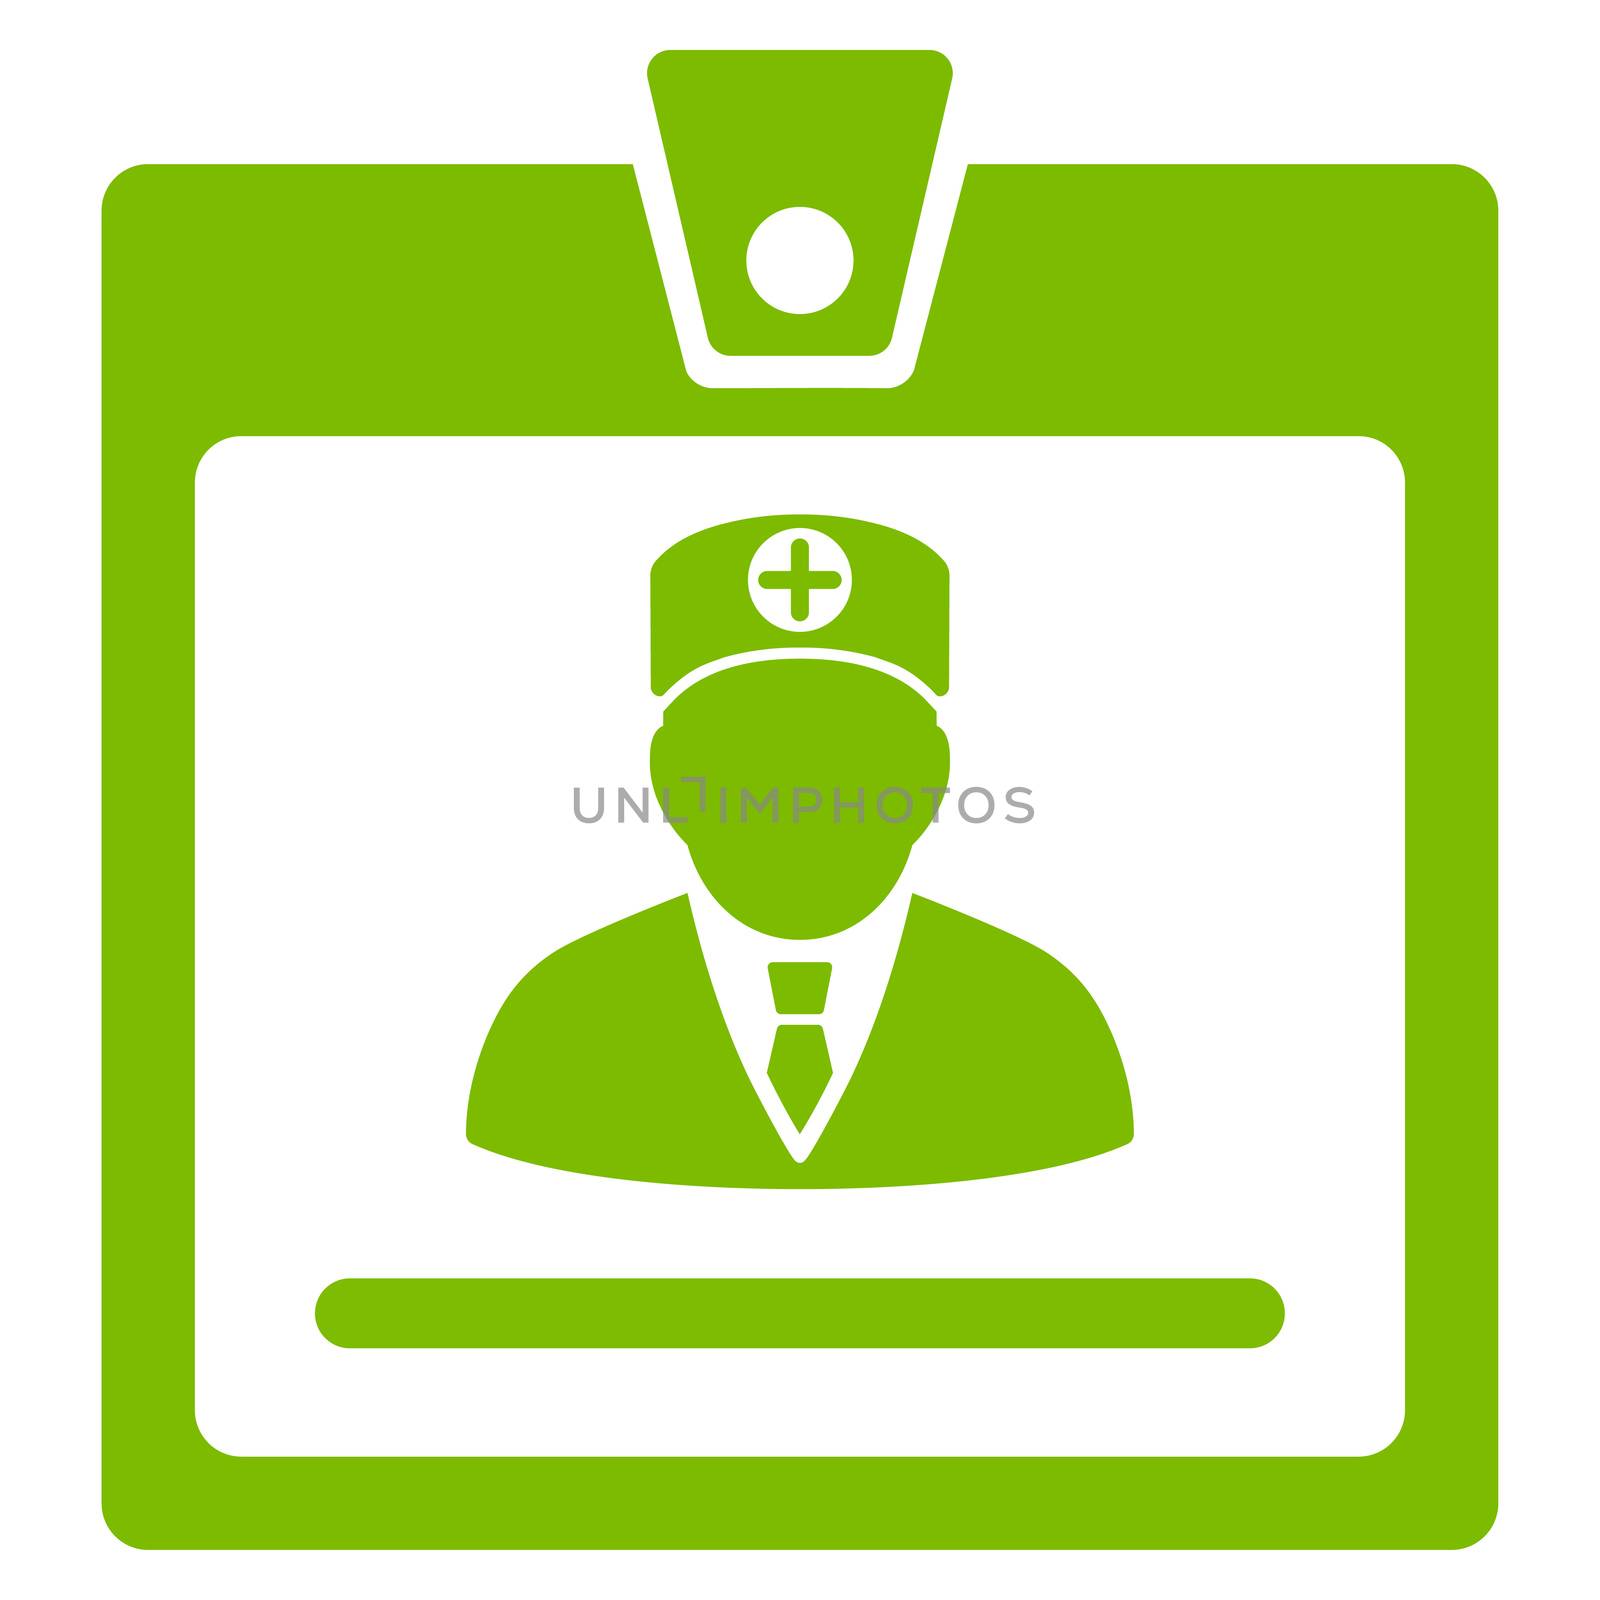 Doctor Badge raster icon. Style is flat symbol, eco green color, rounded angles, white background.